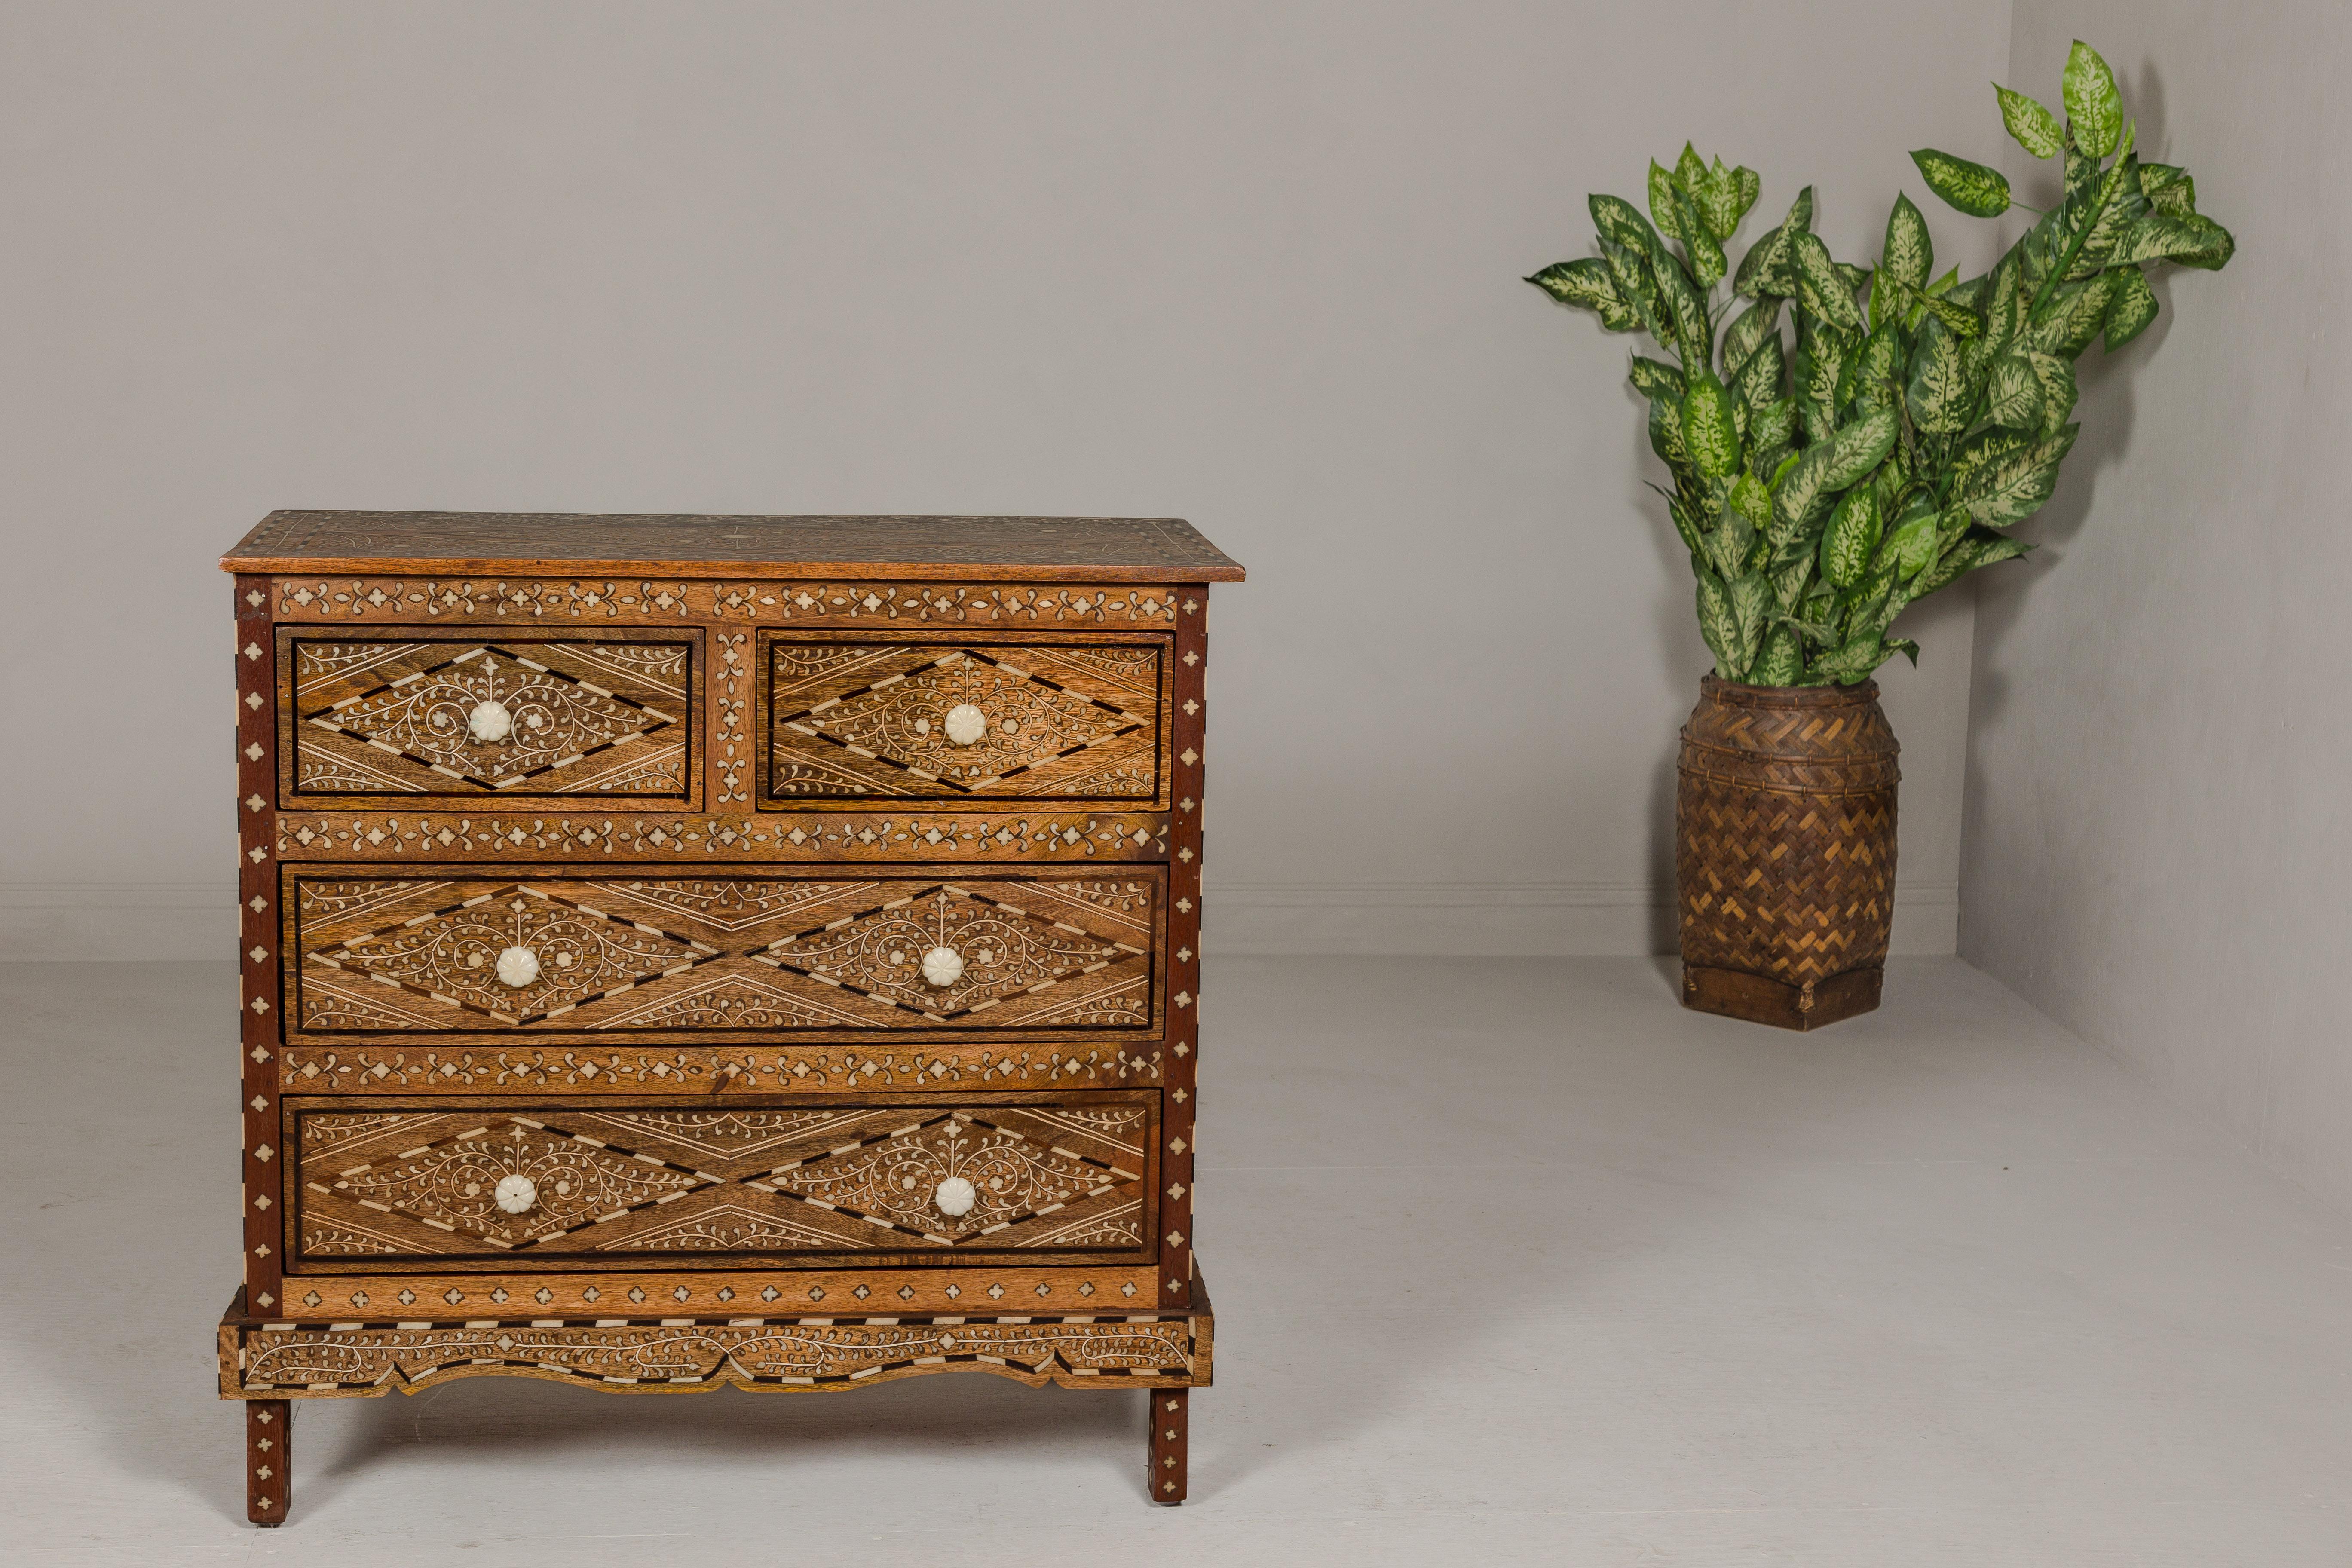 Anglo-Indian Style Mango Wood Four-Drawer Chest with Foliage Bone Inlay In Excellent Condition For Sale In Yonkers, NY